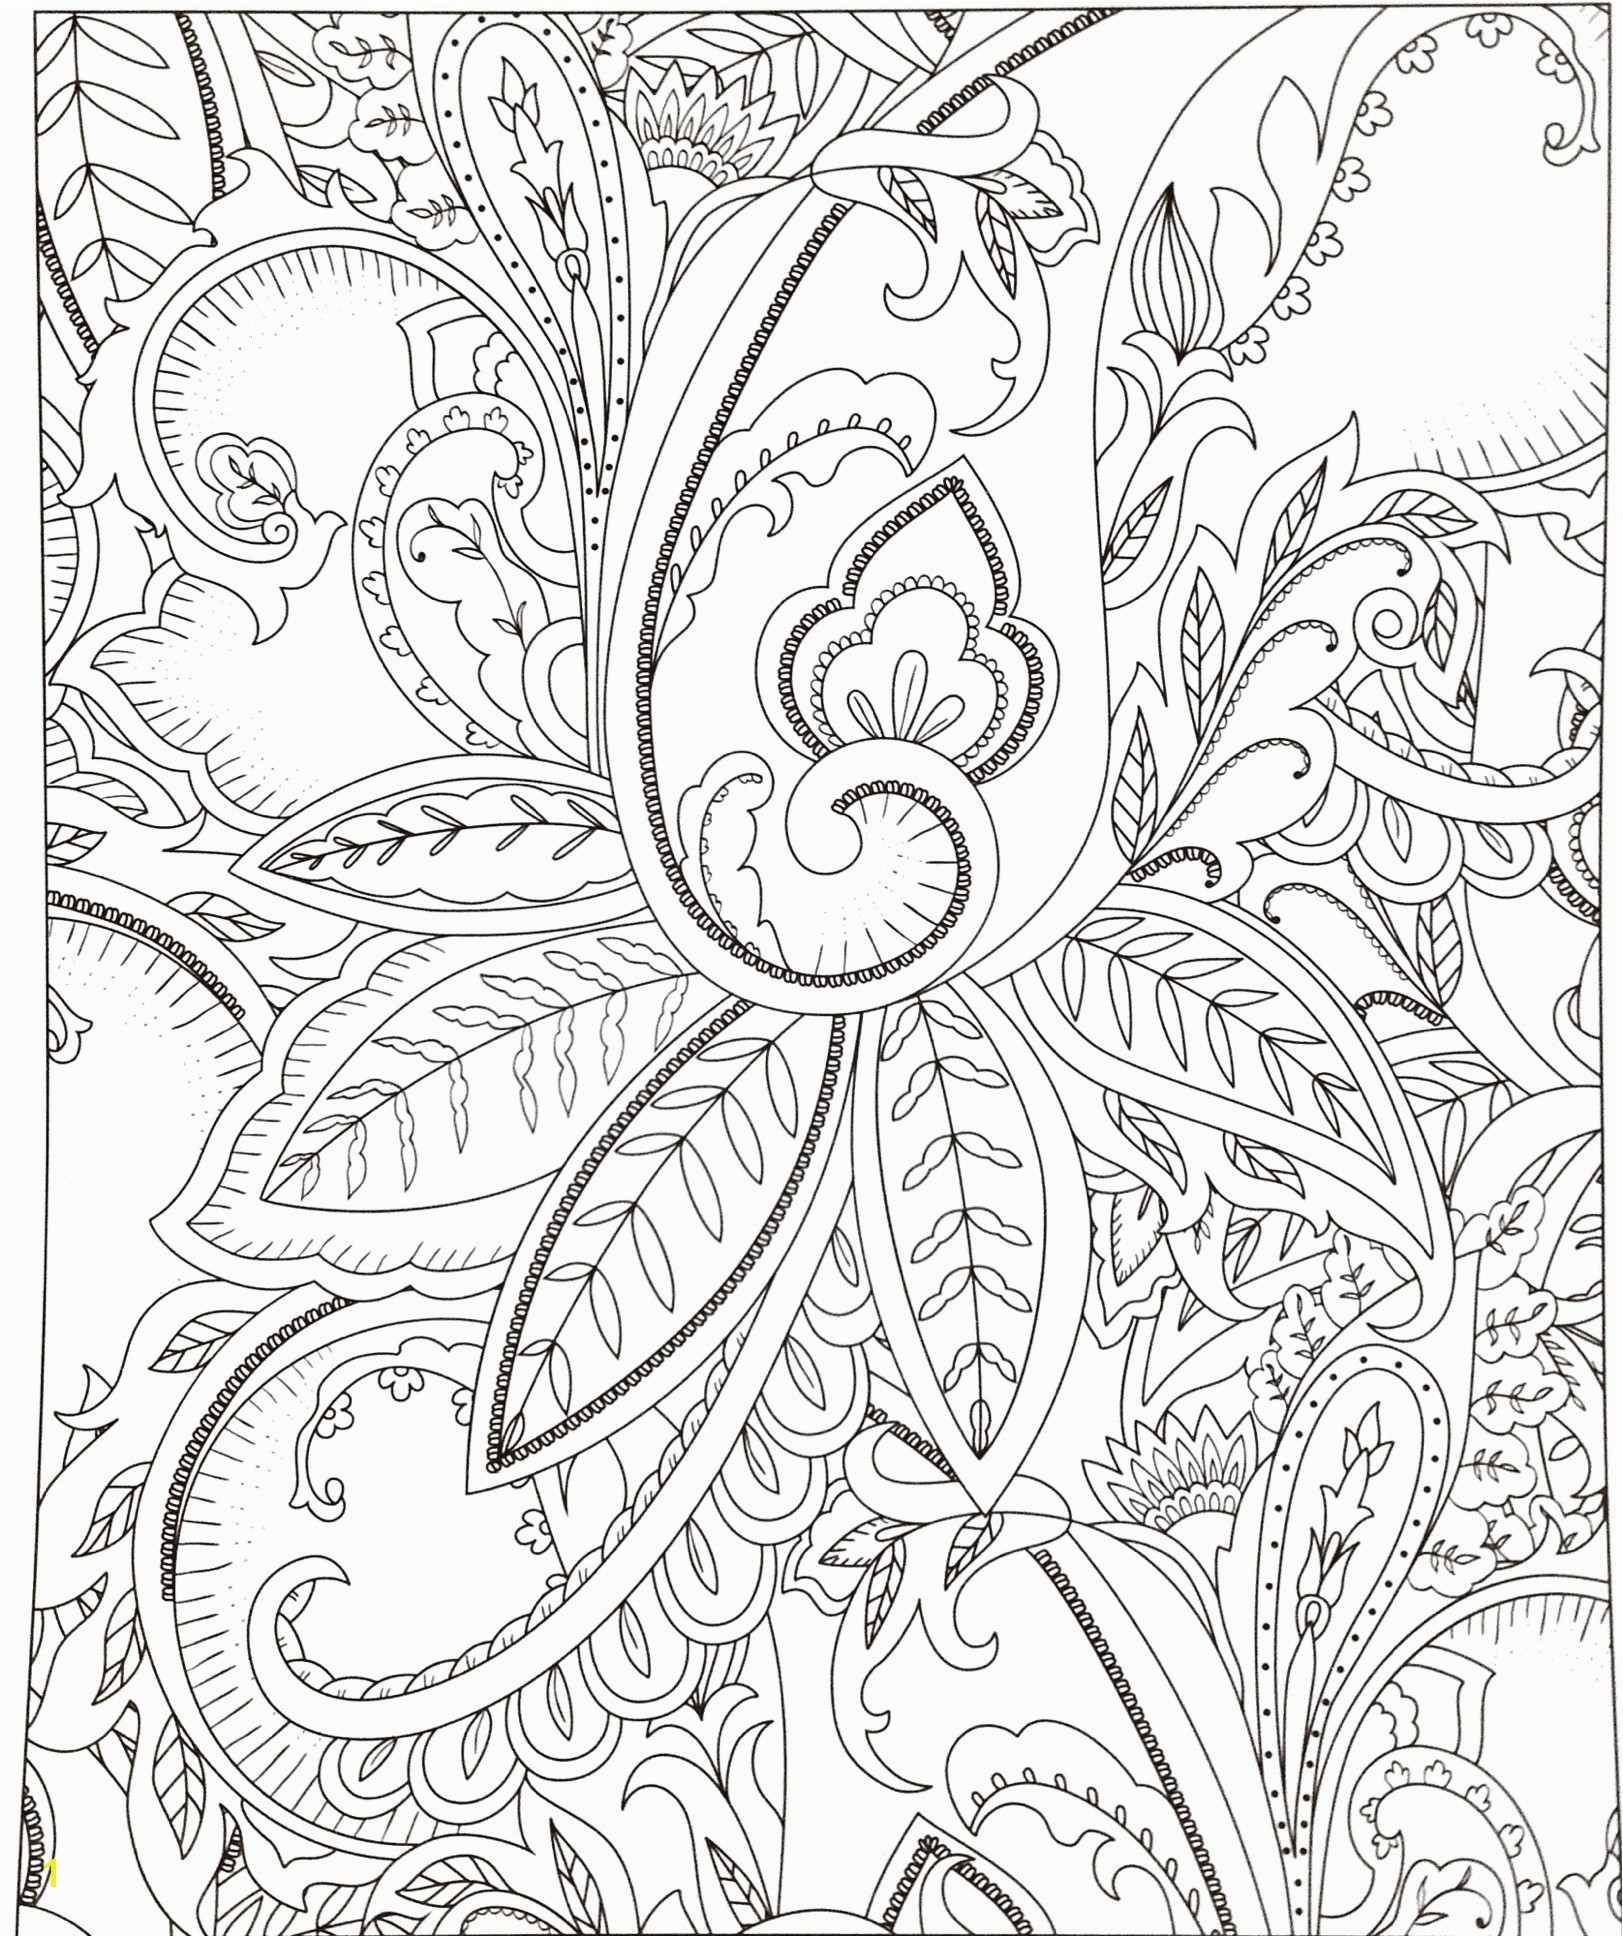 14 attractive Flowers with Vase Free Delivery 2024 free download flowers with vase free delivery of pretty coloring pages of flowers zabelyesayan com for cool vases flower vase coloring page pages flowers in a top i 0d